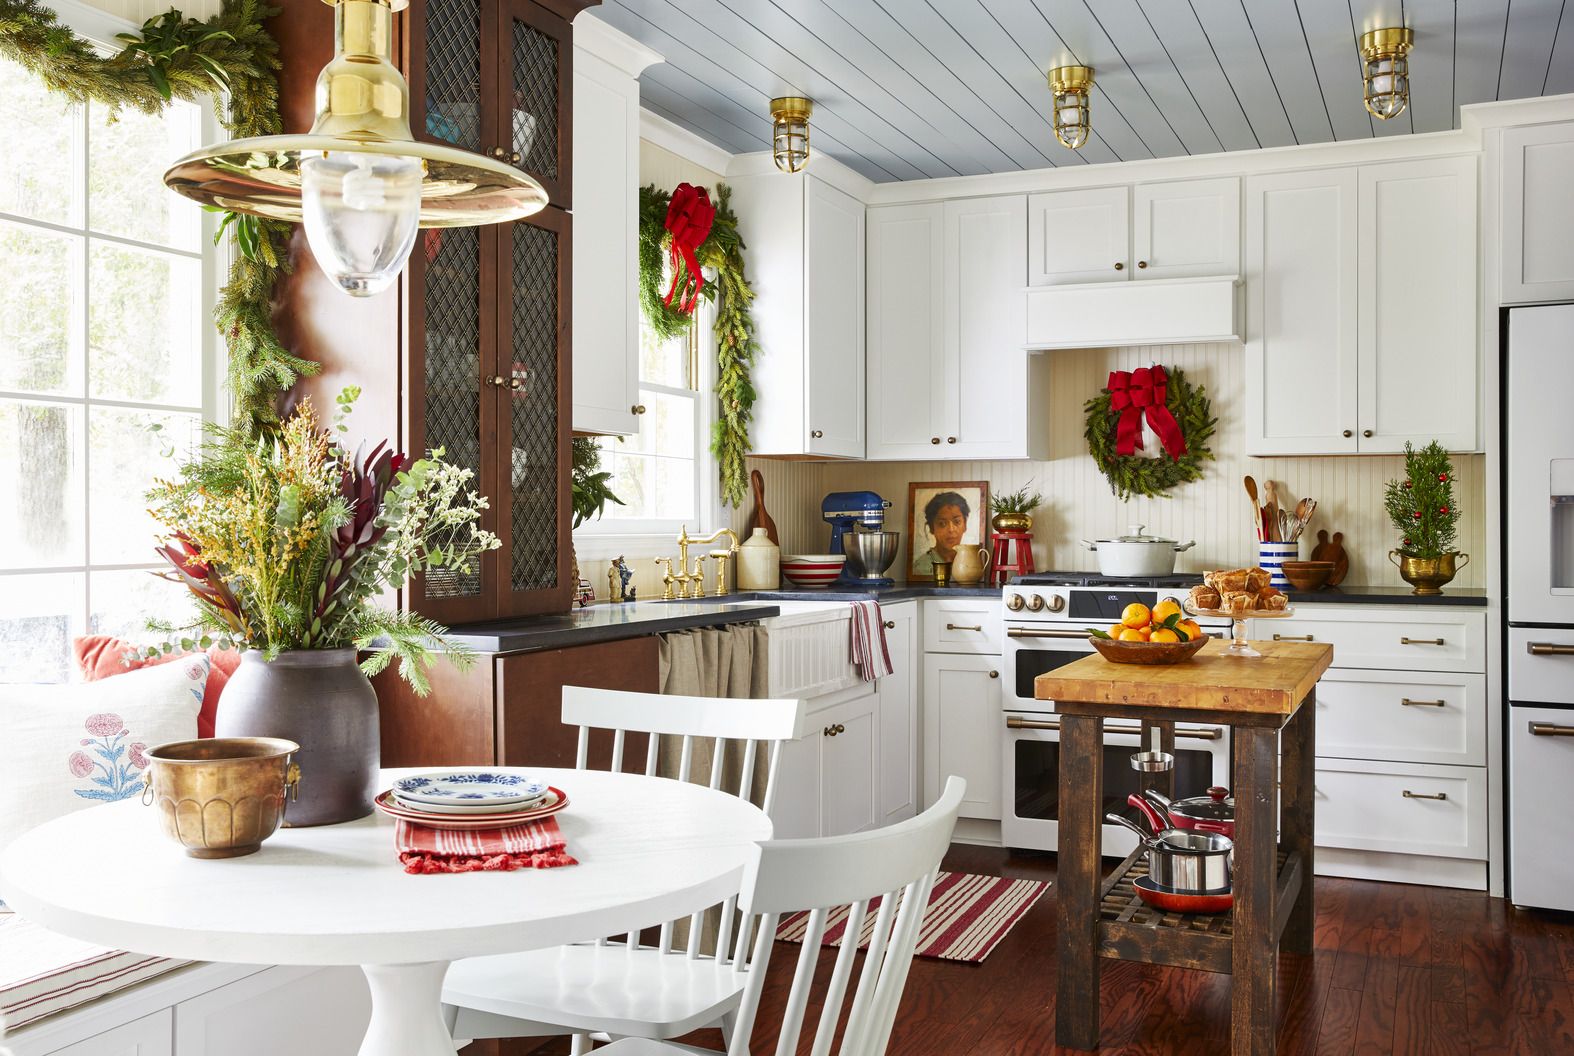 What are Some Tips for Decorating Kitchen Cabinets for Christmas